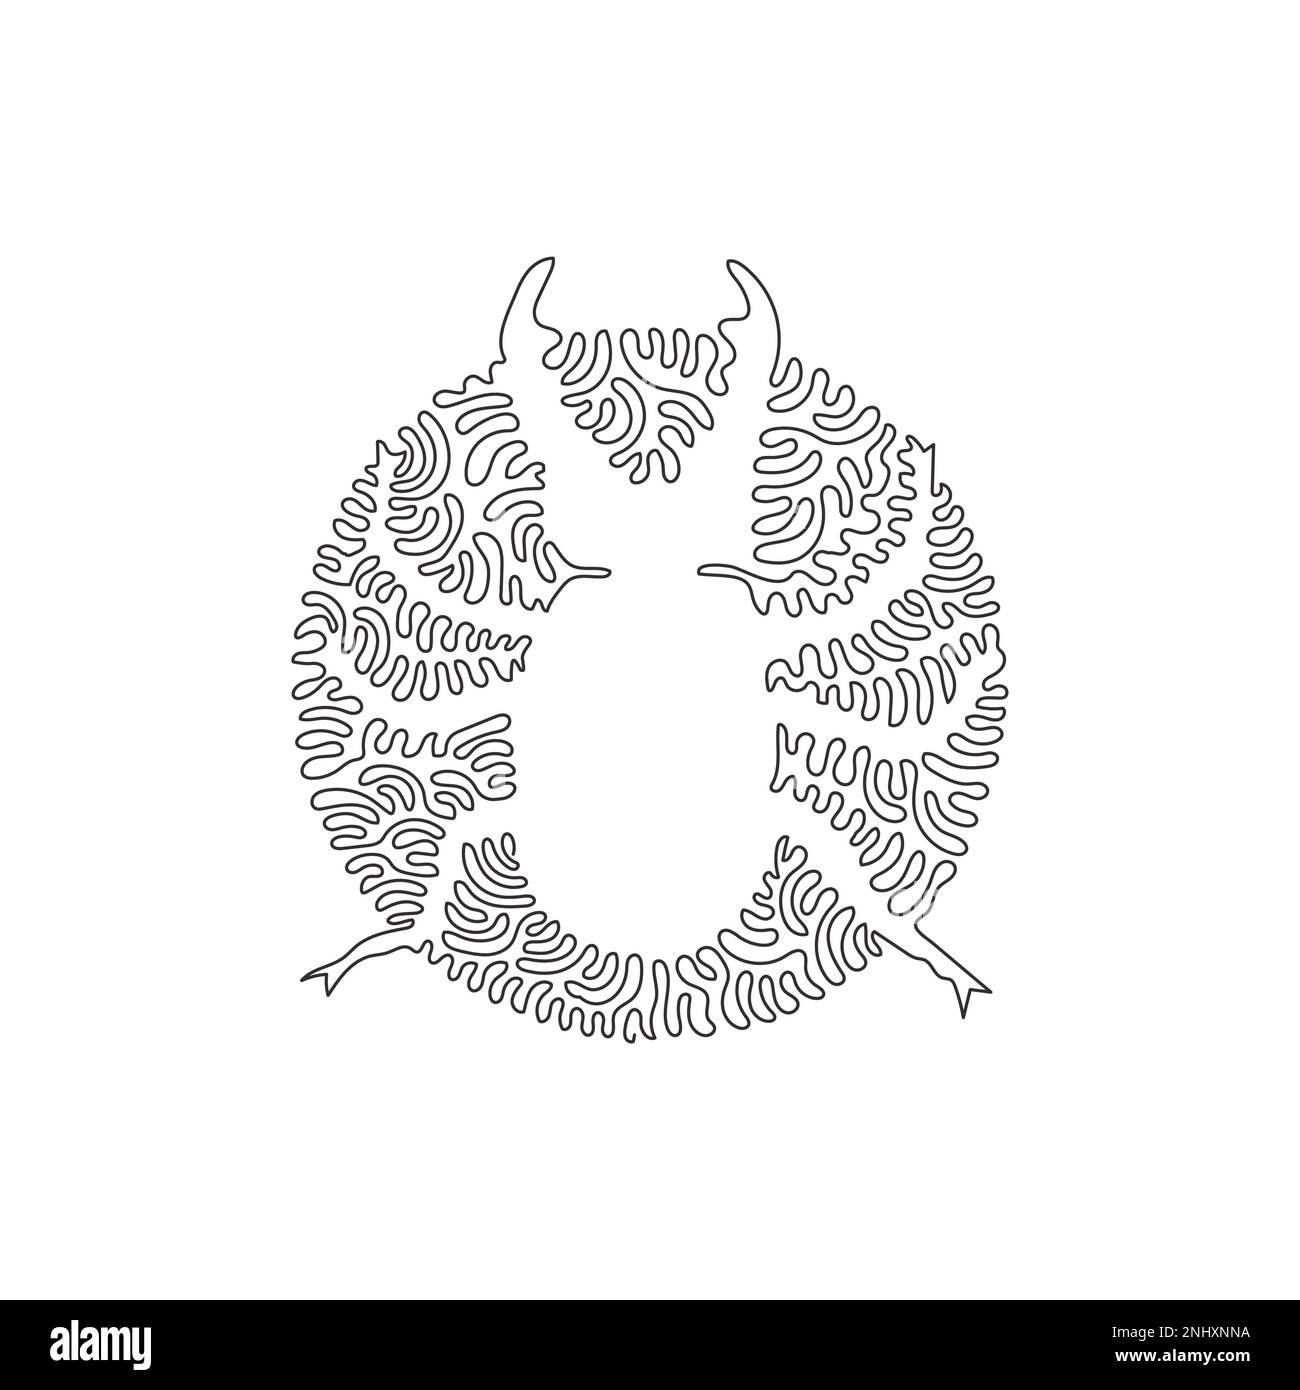 Single curly one line drawing of adorable beetle. Continuous line drawing design vector illustration of a beetle wing as a protective shield Stock Vector